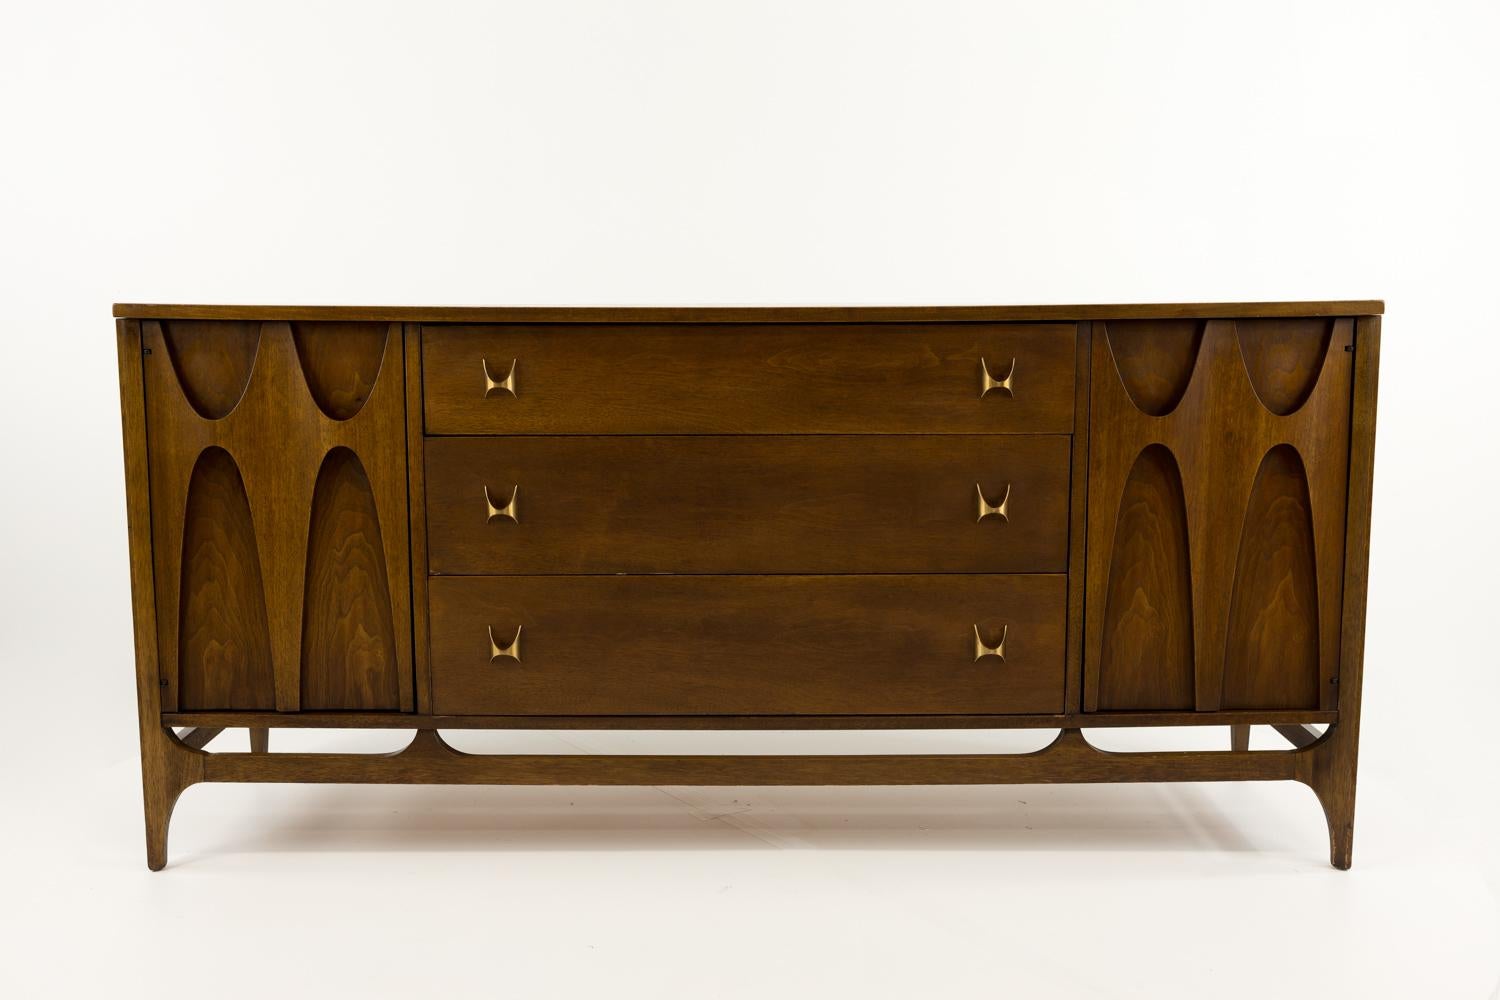 Broyhill Brasilia mid century sideboard buffet credenza

This credenza measures: 66 wide x 19 deep x 30.75 inches high

All pieces of furniture can be had in what we call restored vintage condition. That means the piece is restored upon purchase